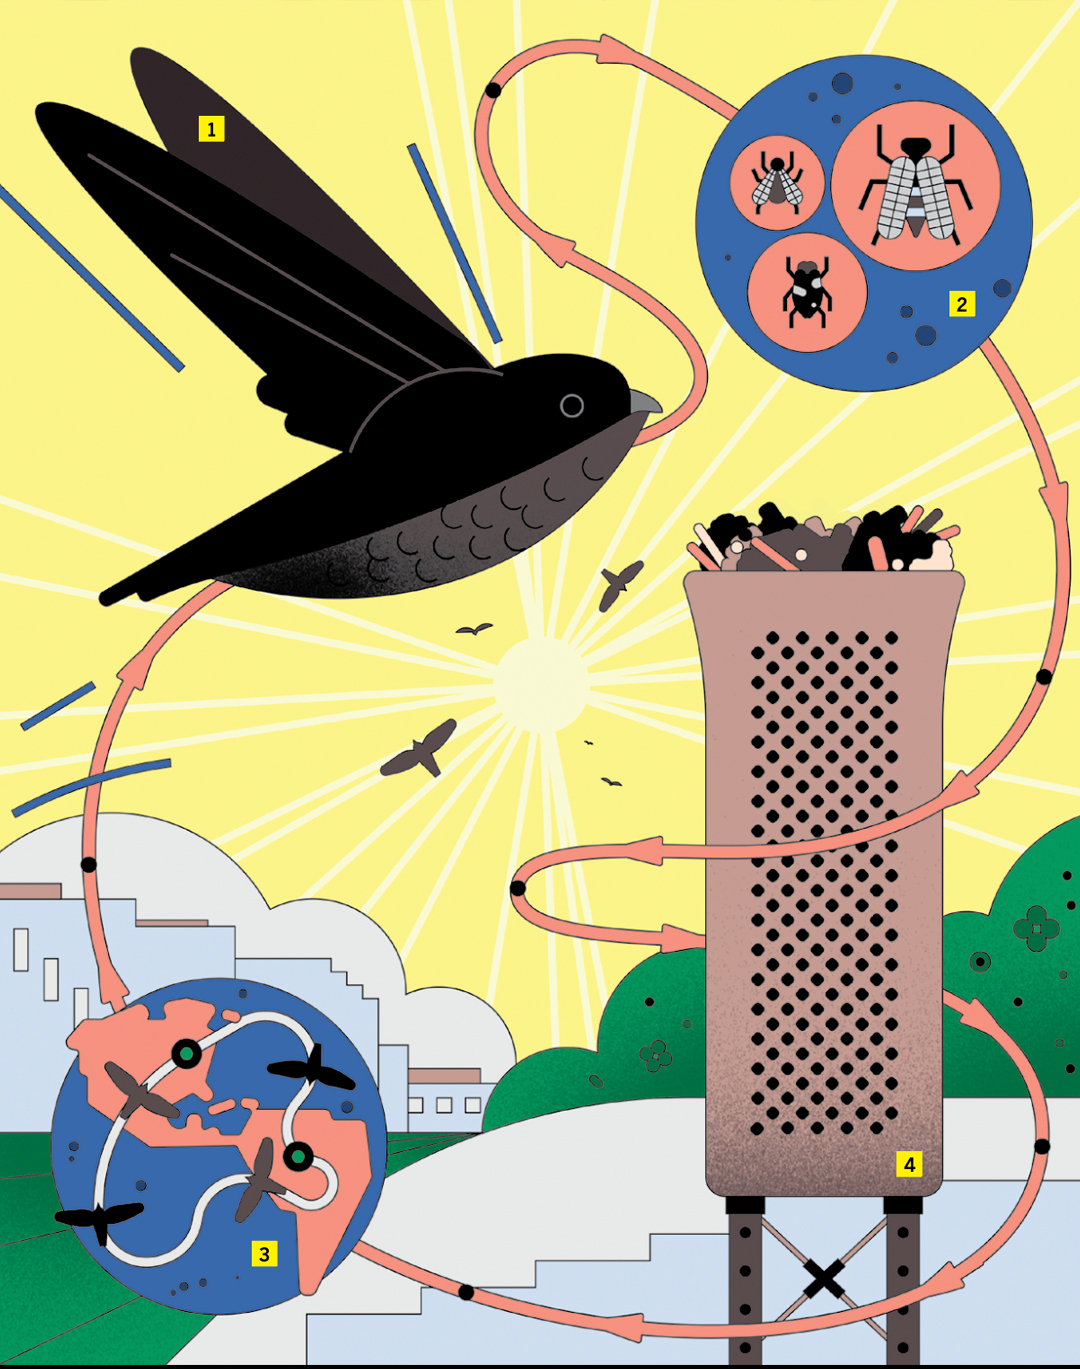 An illustration showing chimney swift nesting towers